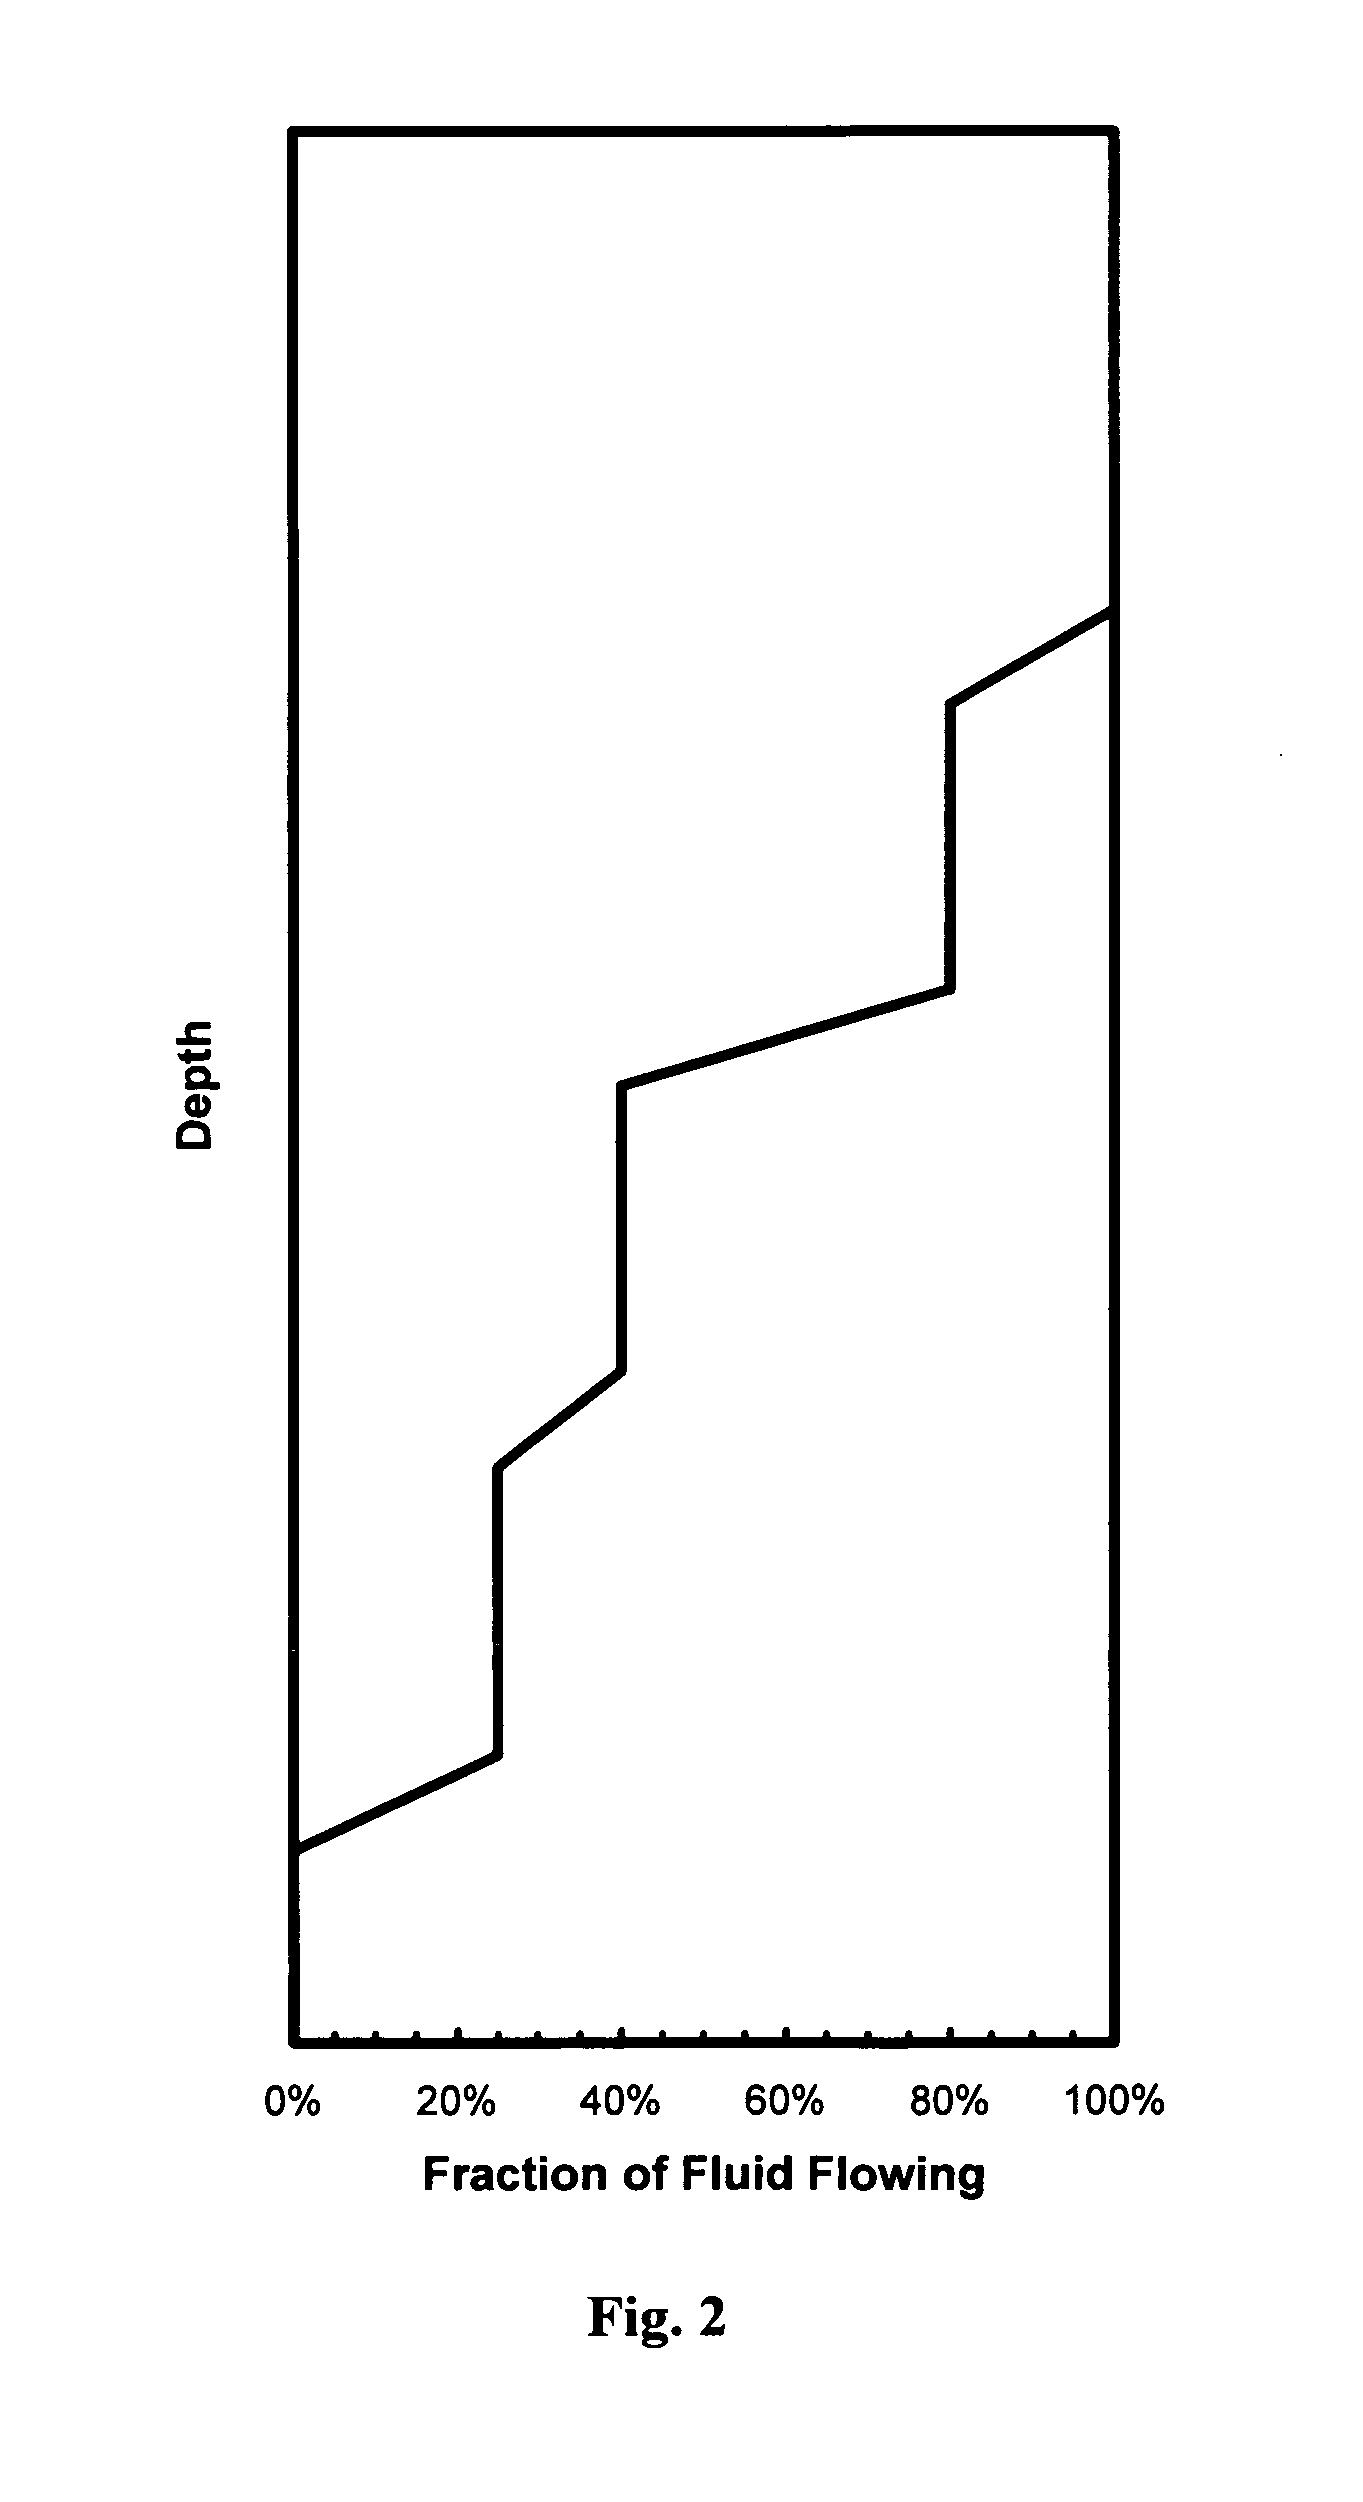 Method for characterizing and forecasting performance of wells in multilayer reservoirs having commingled production